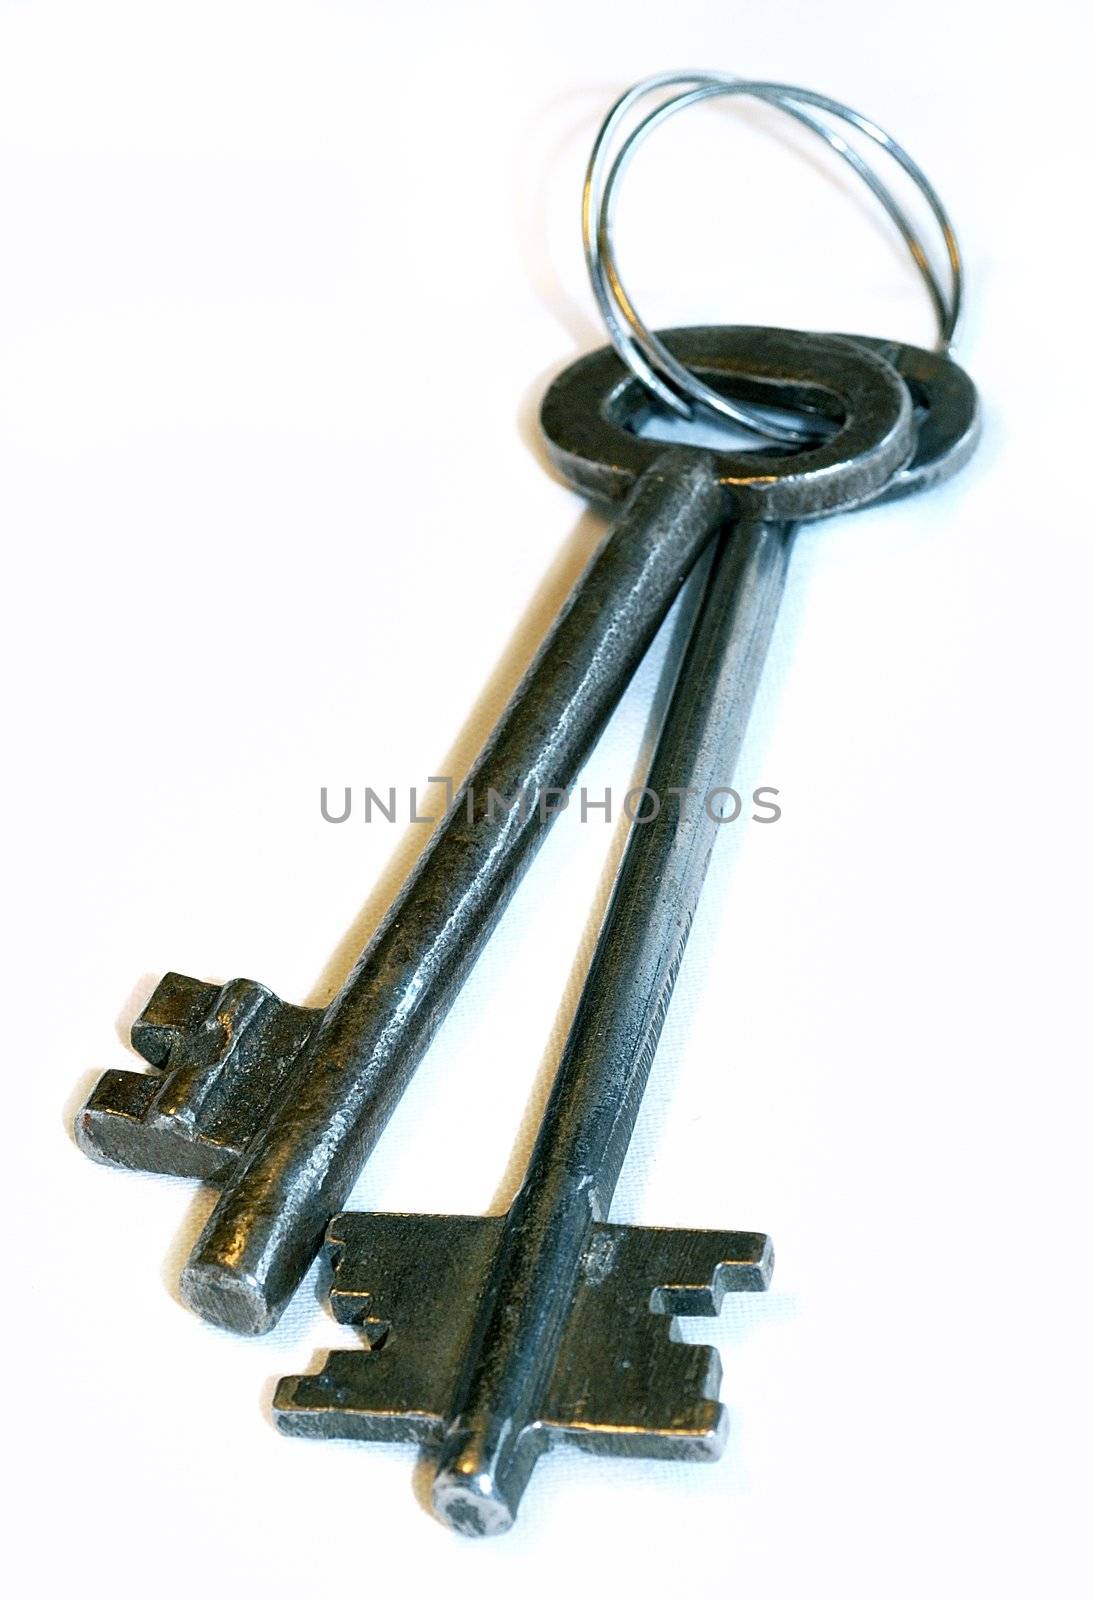 age-old keys from a ferruginous metal